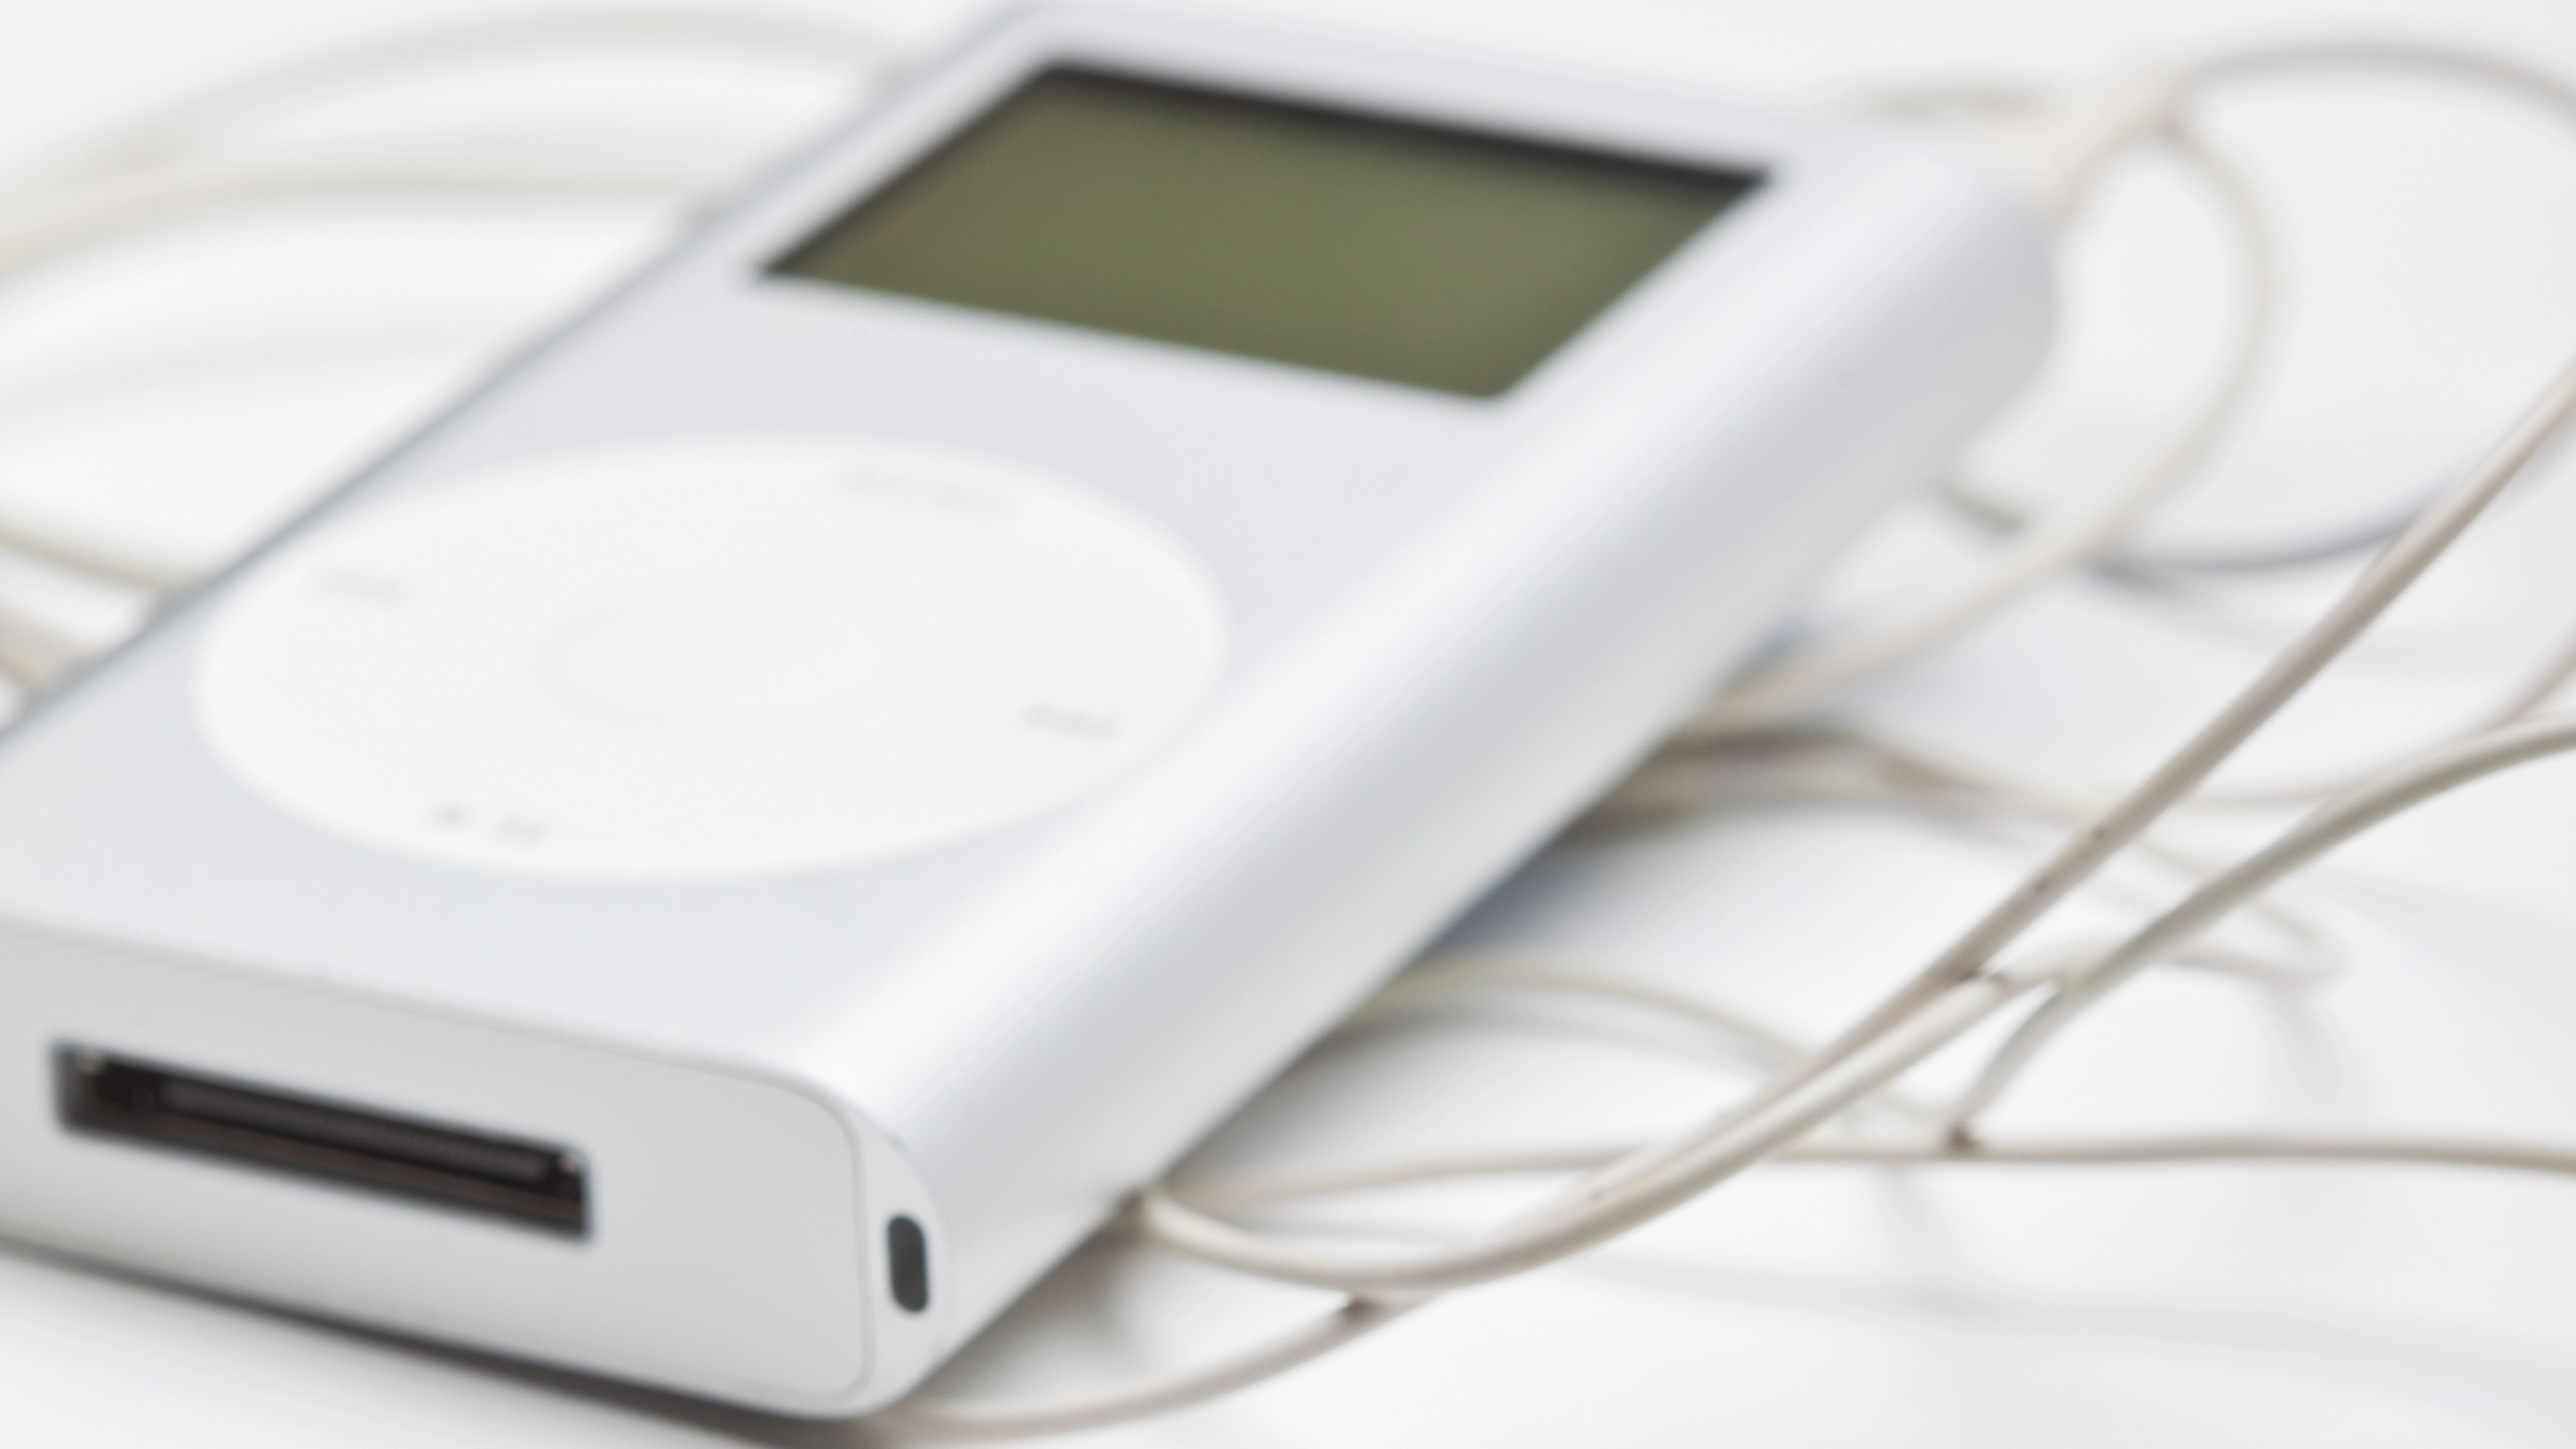 Copy Songs from iPod to Zune